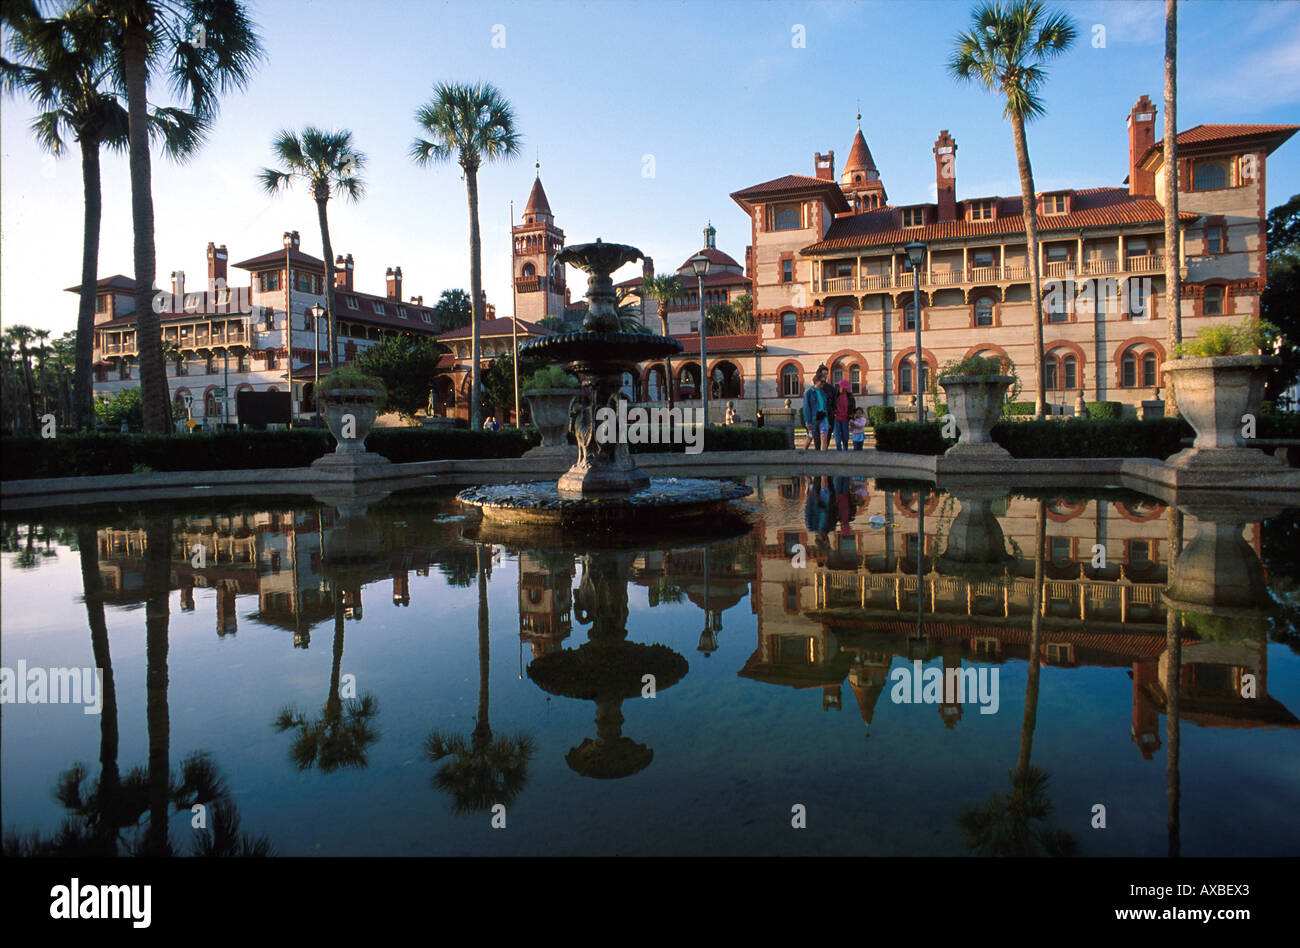 Reflection at the fountain in front of the Flagler College, St. Augustine Florida, USA, America Stock Photo